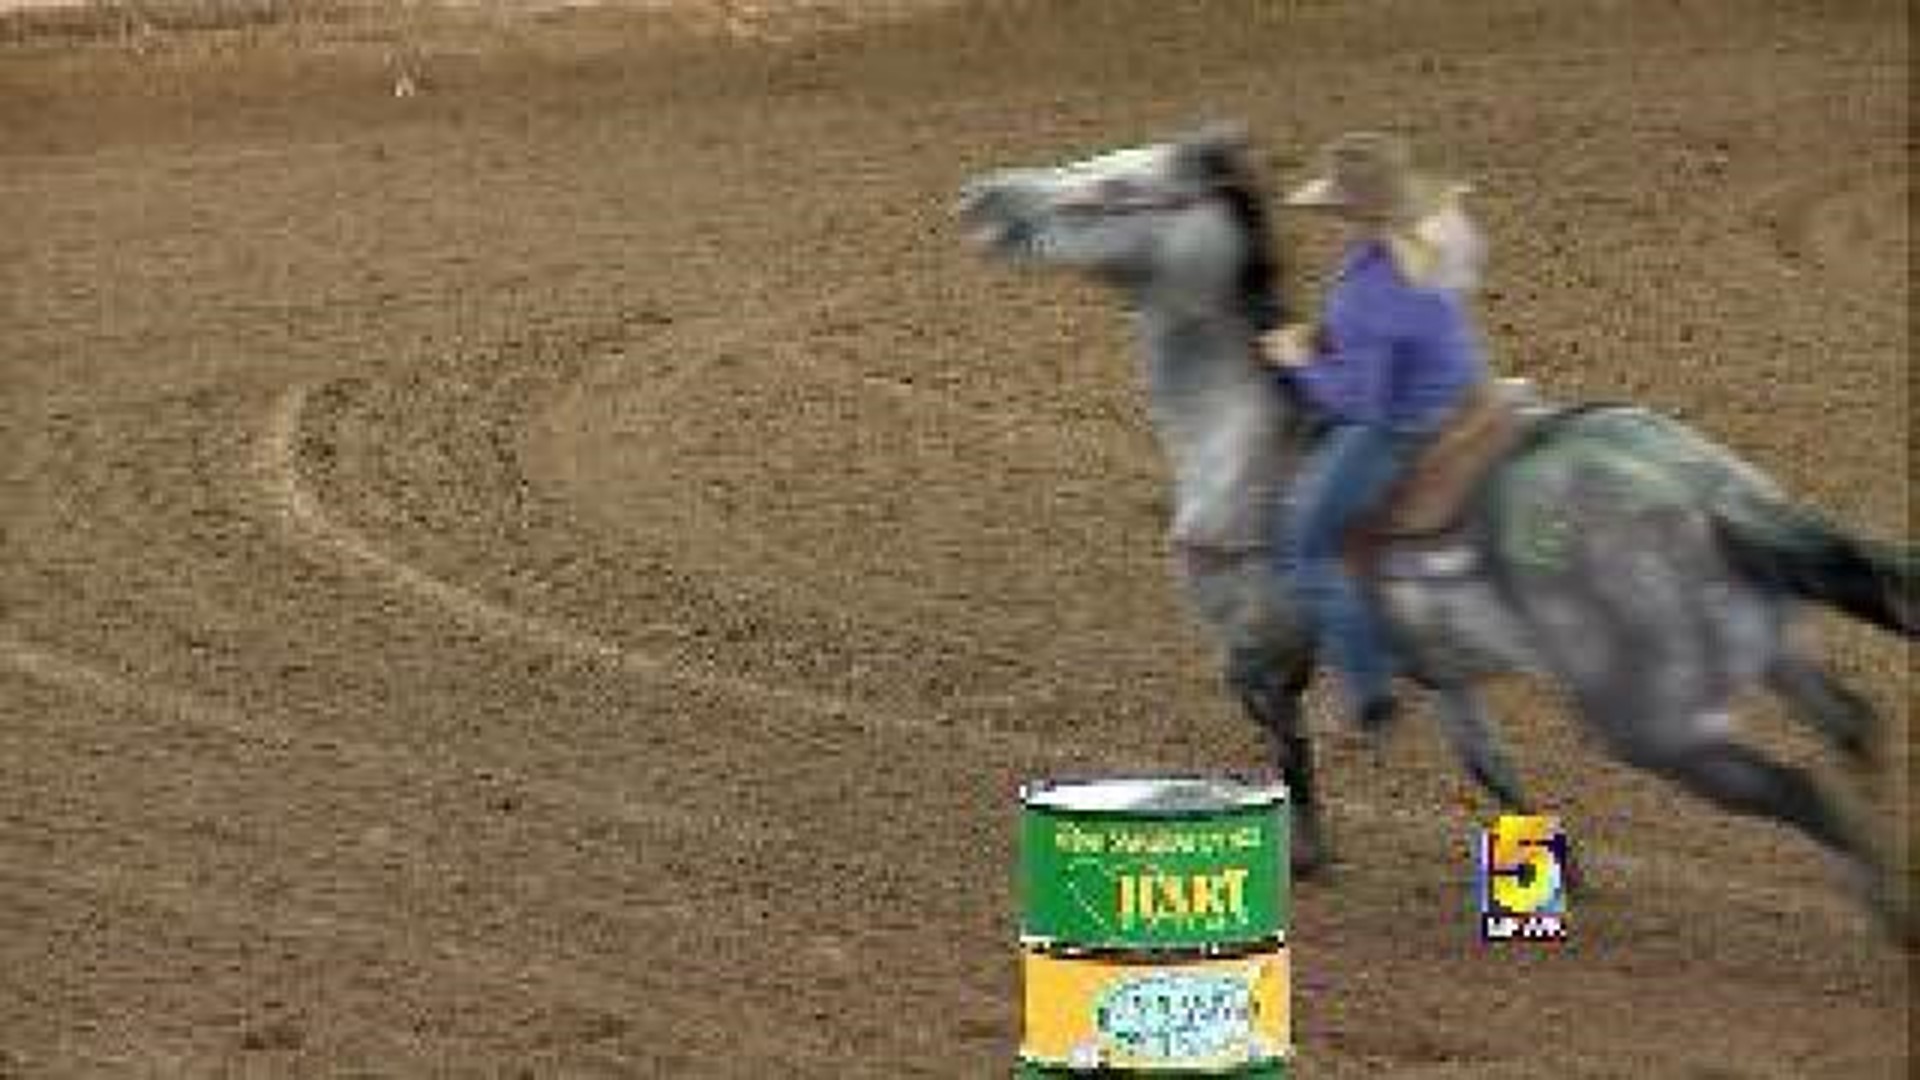 Big Prize Barrel Racing in Fort Smith